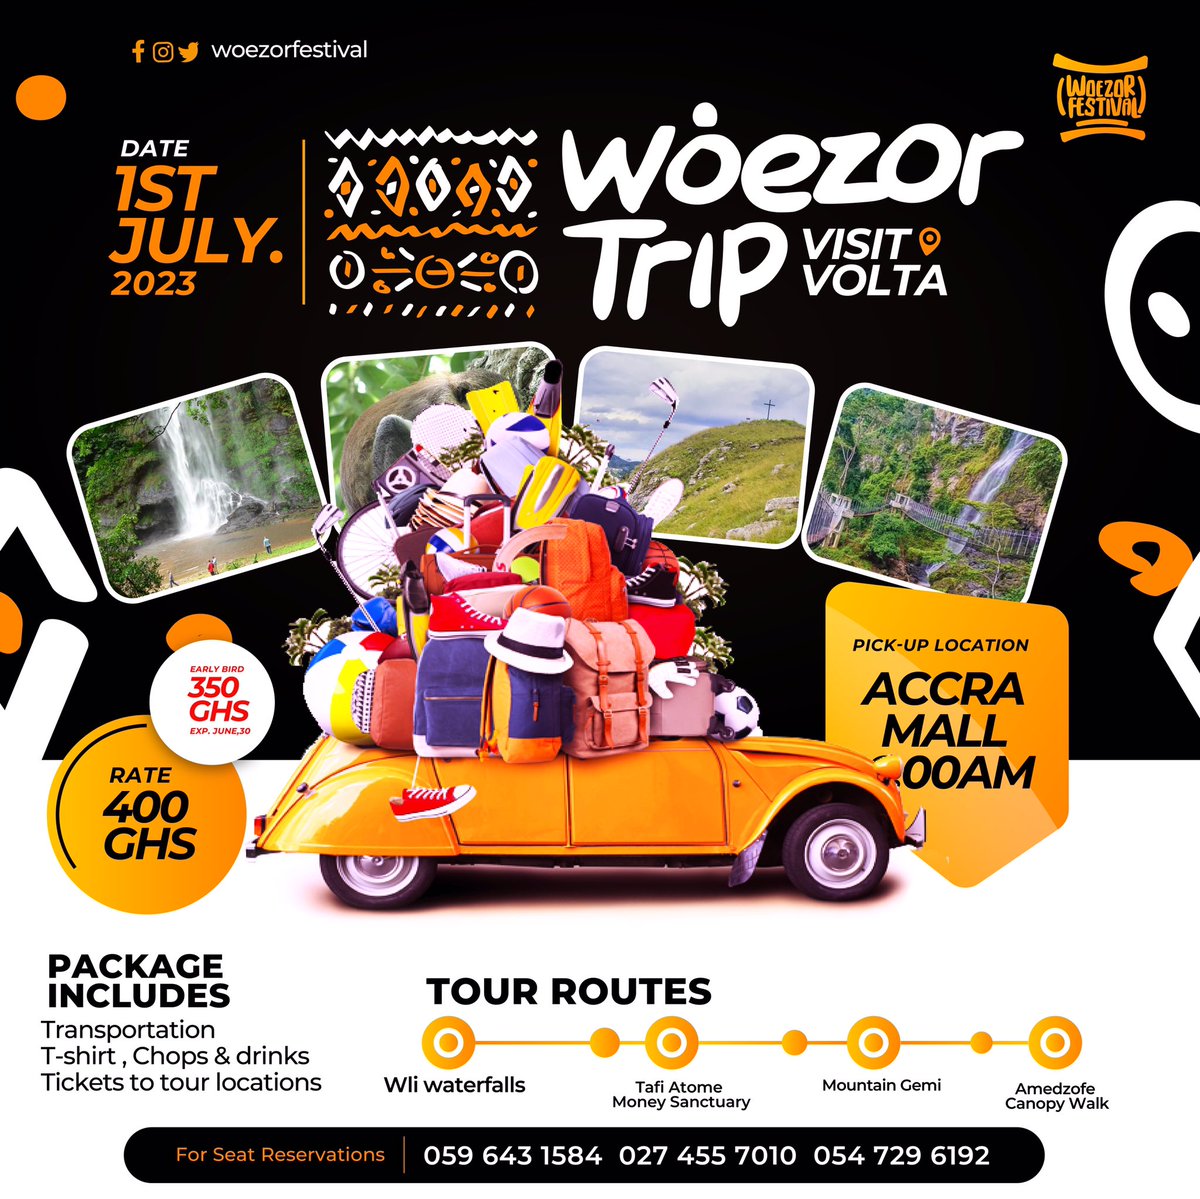 Join the #woezortrip to Volta this 1st July with the whole Woezor Fan Page members as we exposal different tourist sites in Ghana. Woezor Va Volta! 

#woezorfest23 #woezortrip #woezorfanpage #visitvolta #tourismgh